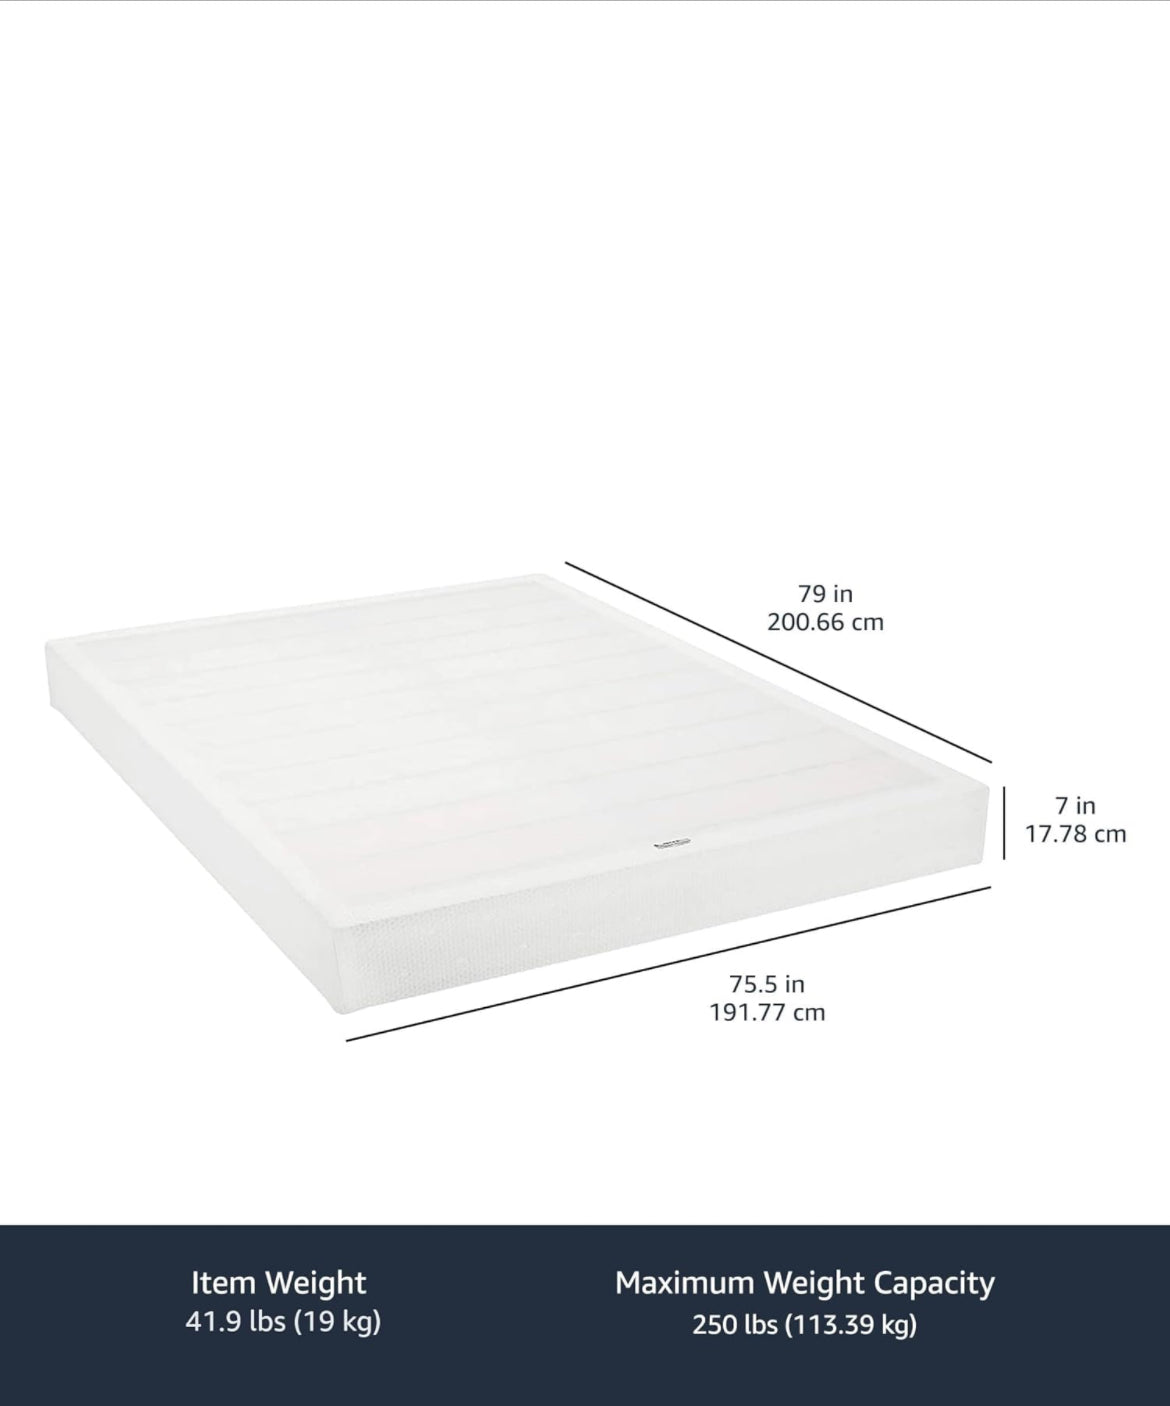 Amazon Basics Smart Box Spring Bed Base, Extra Firm Memory Foam Mattress Foundation, Tool-Free Easy Assembly, King, White, 79 x 75.5 x 7 inches